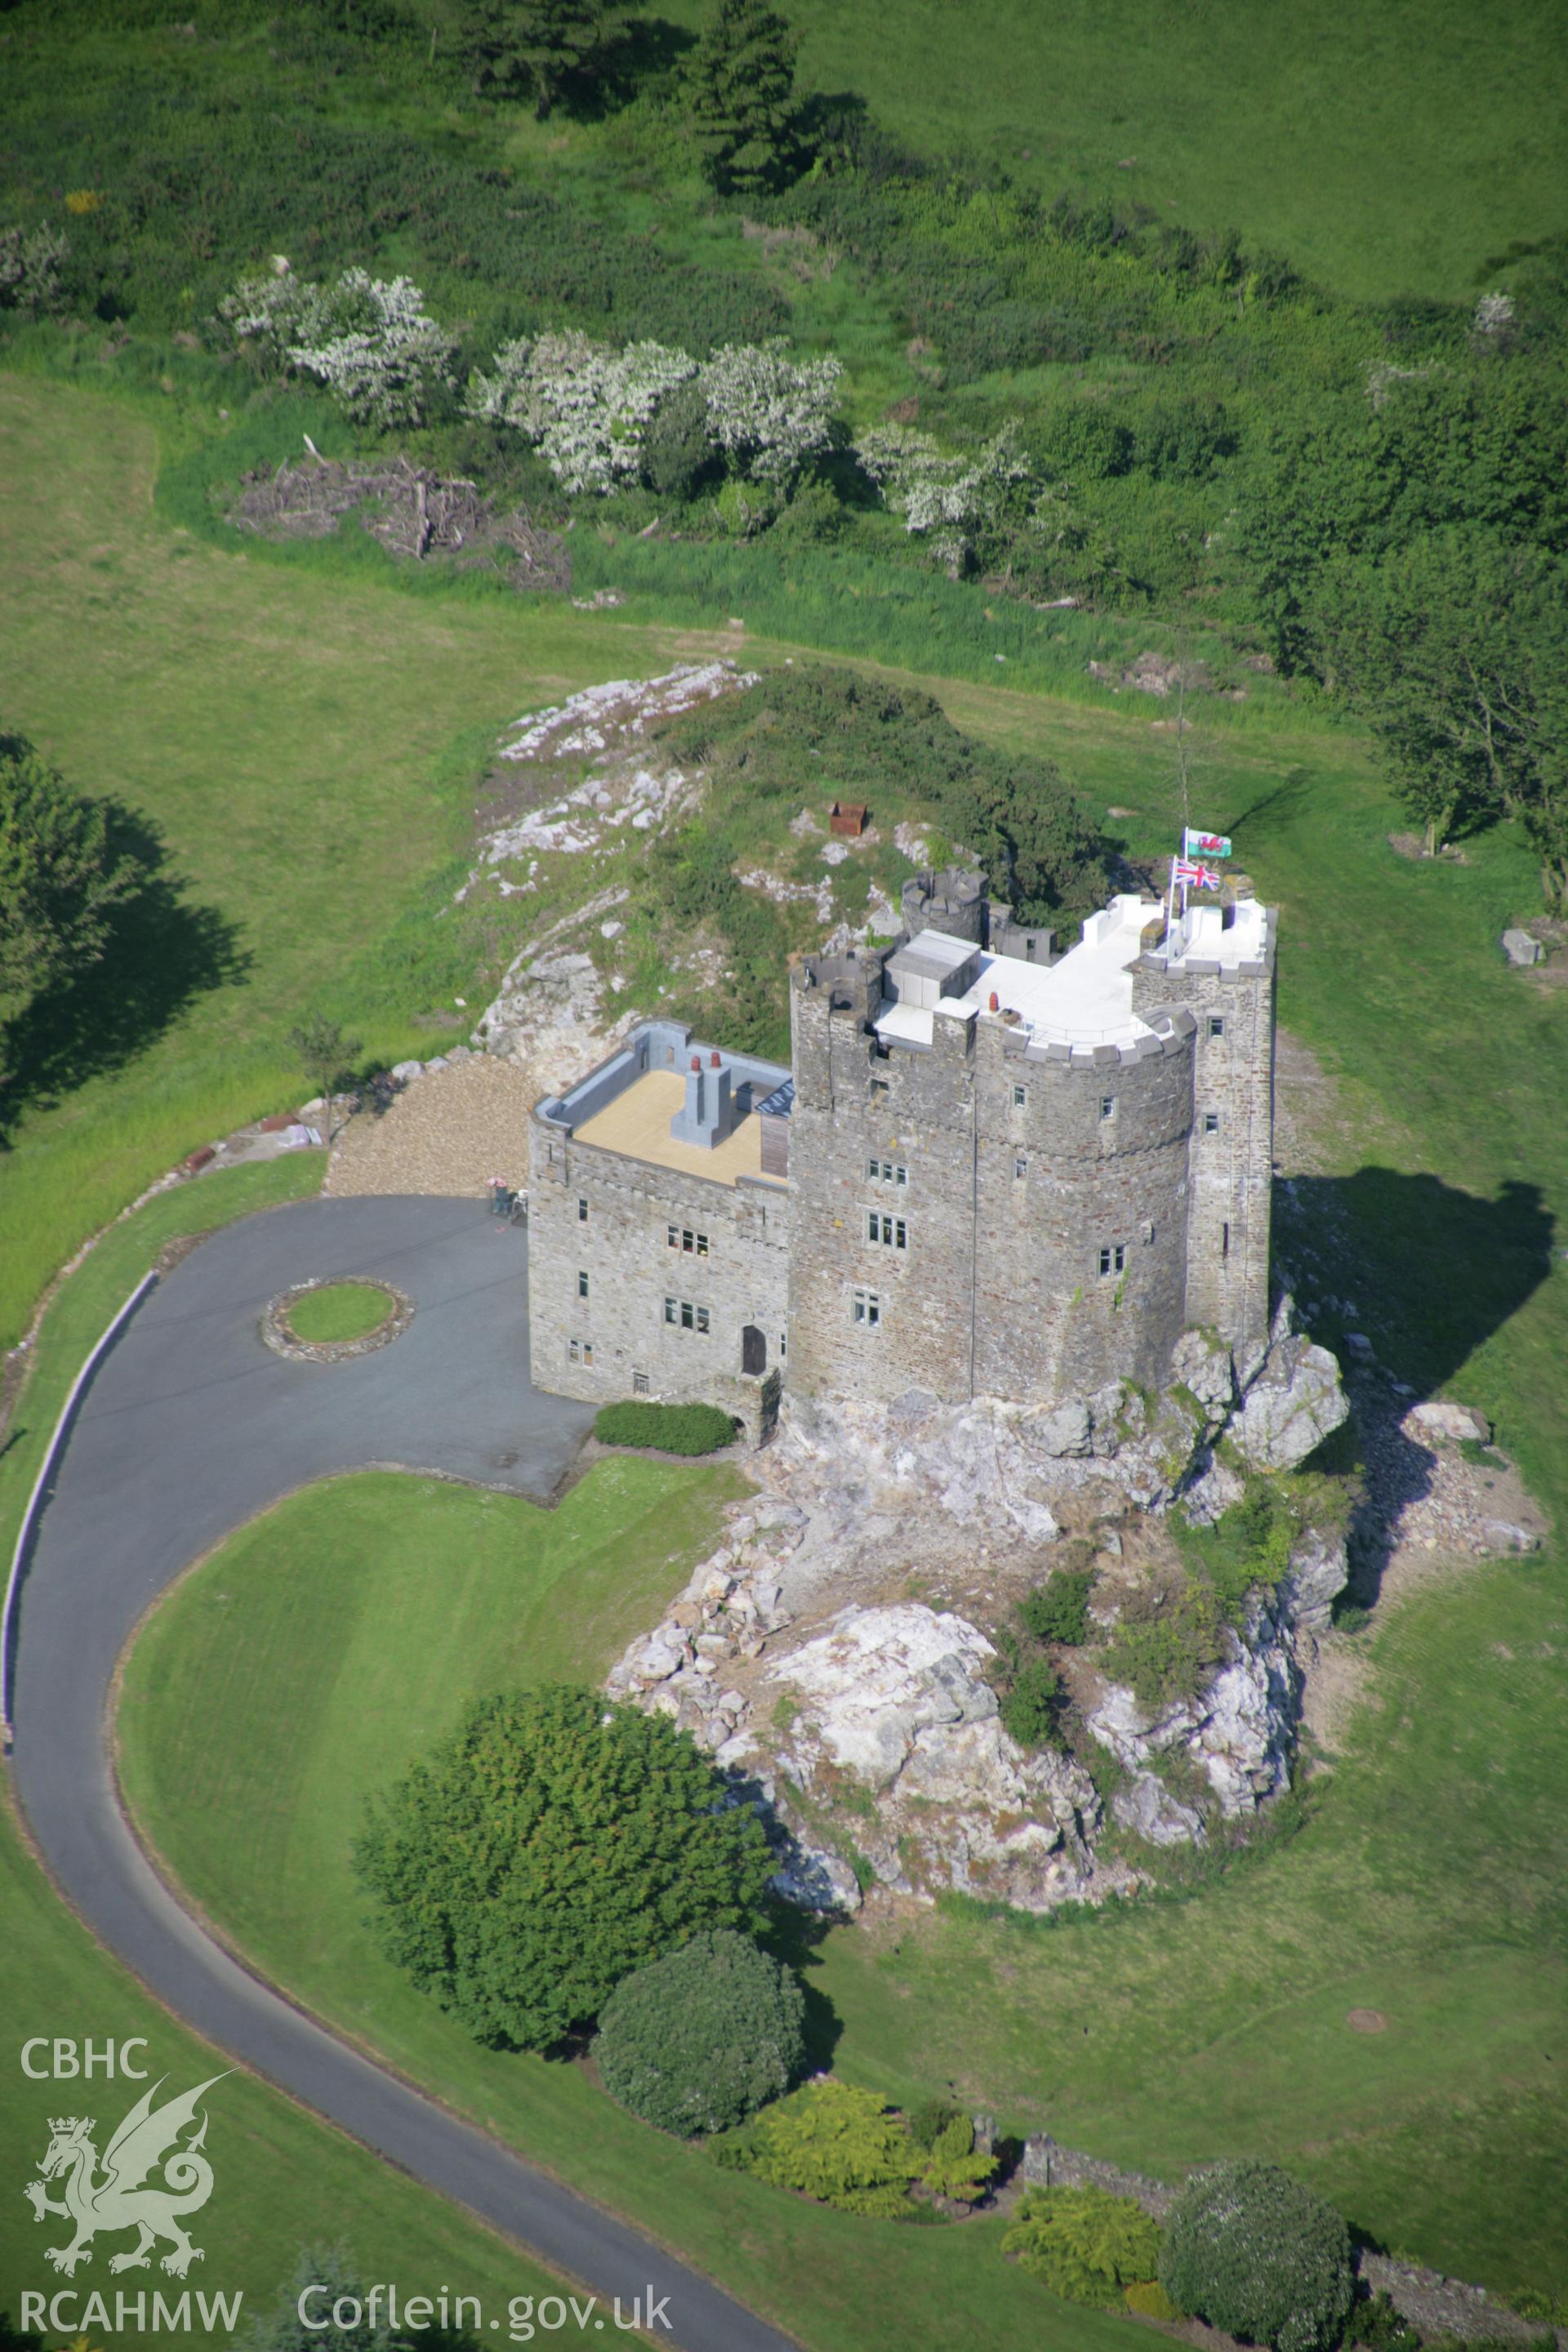 RCAHMW colour oblique aerial photograph of Roch Castle from the south-west. Taken on 08 June 2006 by Toby Driver.